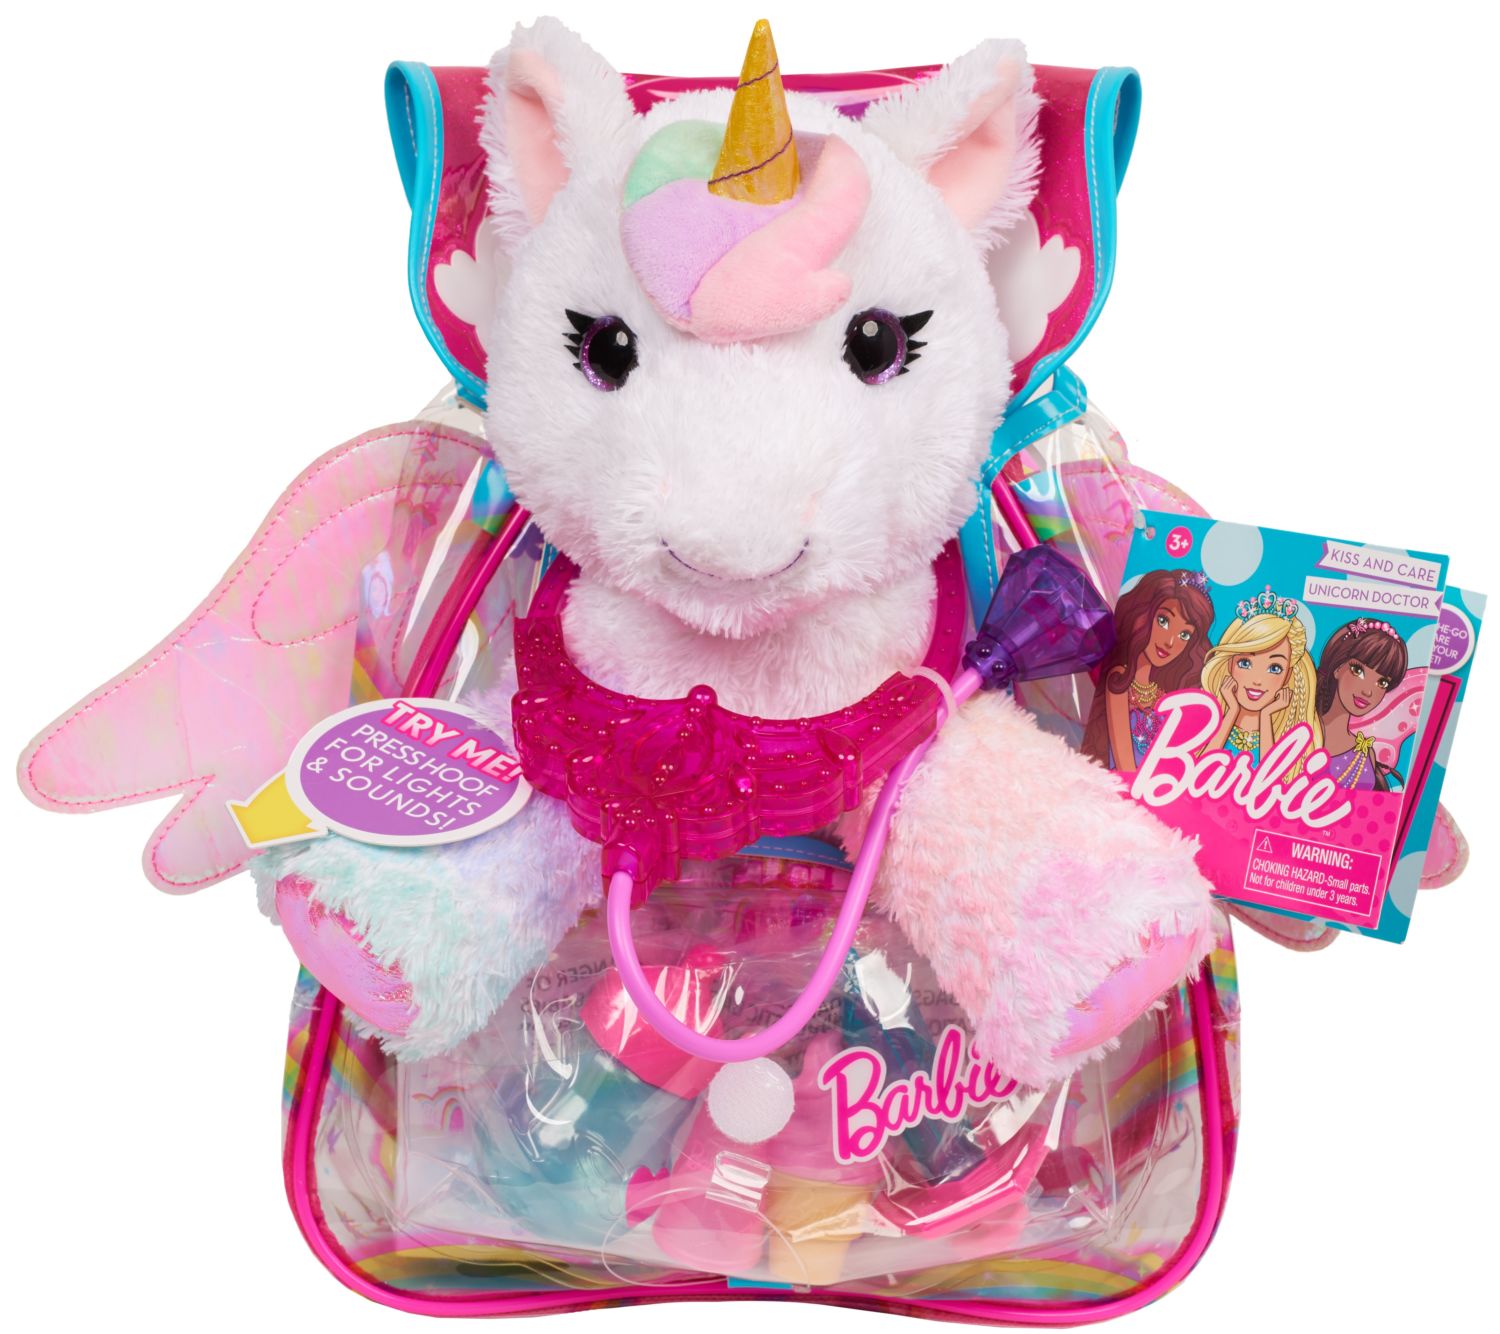 Kids Can Become A Unicorn Doctor Thanks To Barbie - The Toy Insider